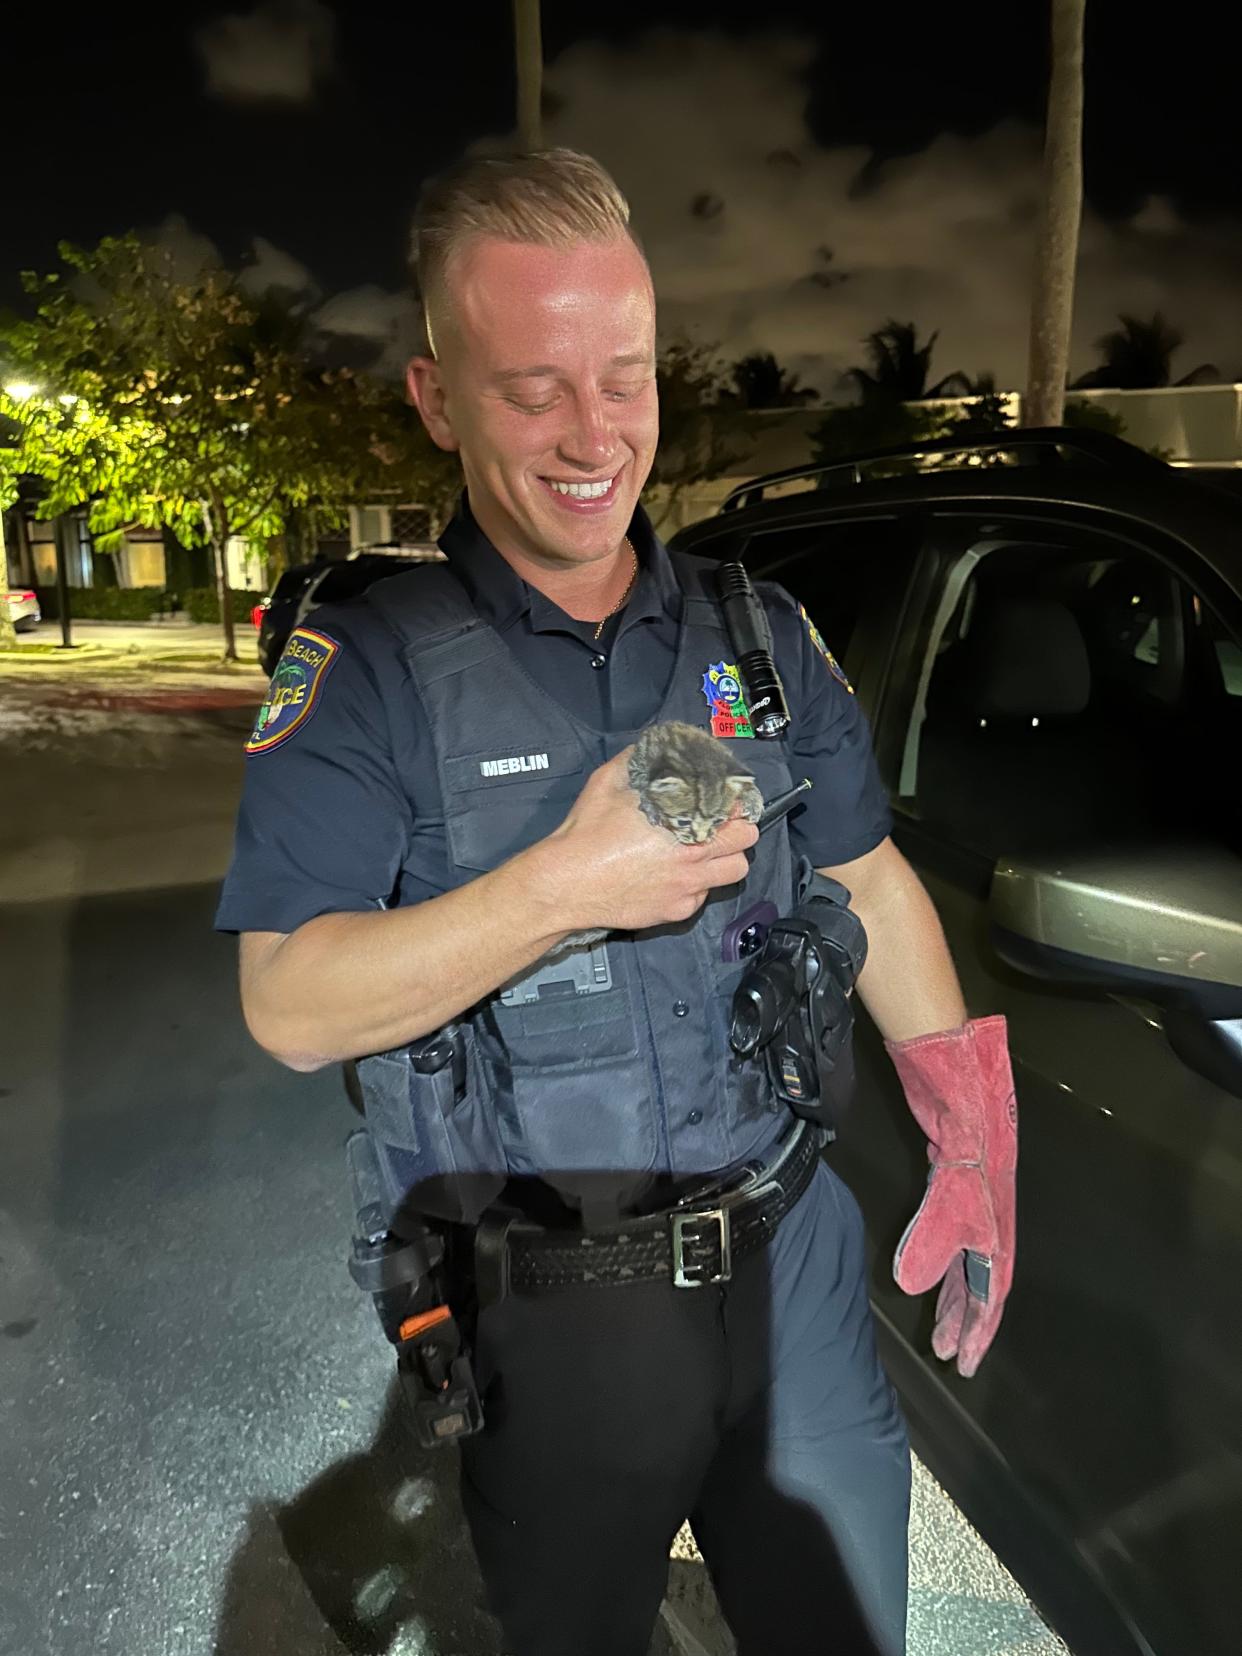 Officer Dan Meblin with Officer Dan, the kitten he helped to rescue.